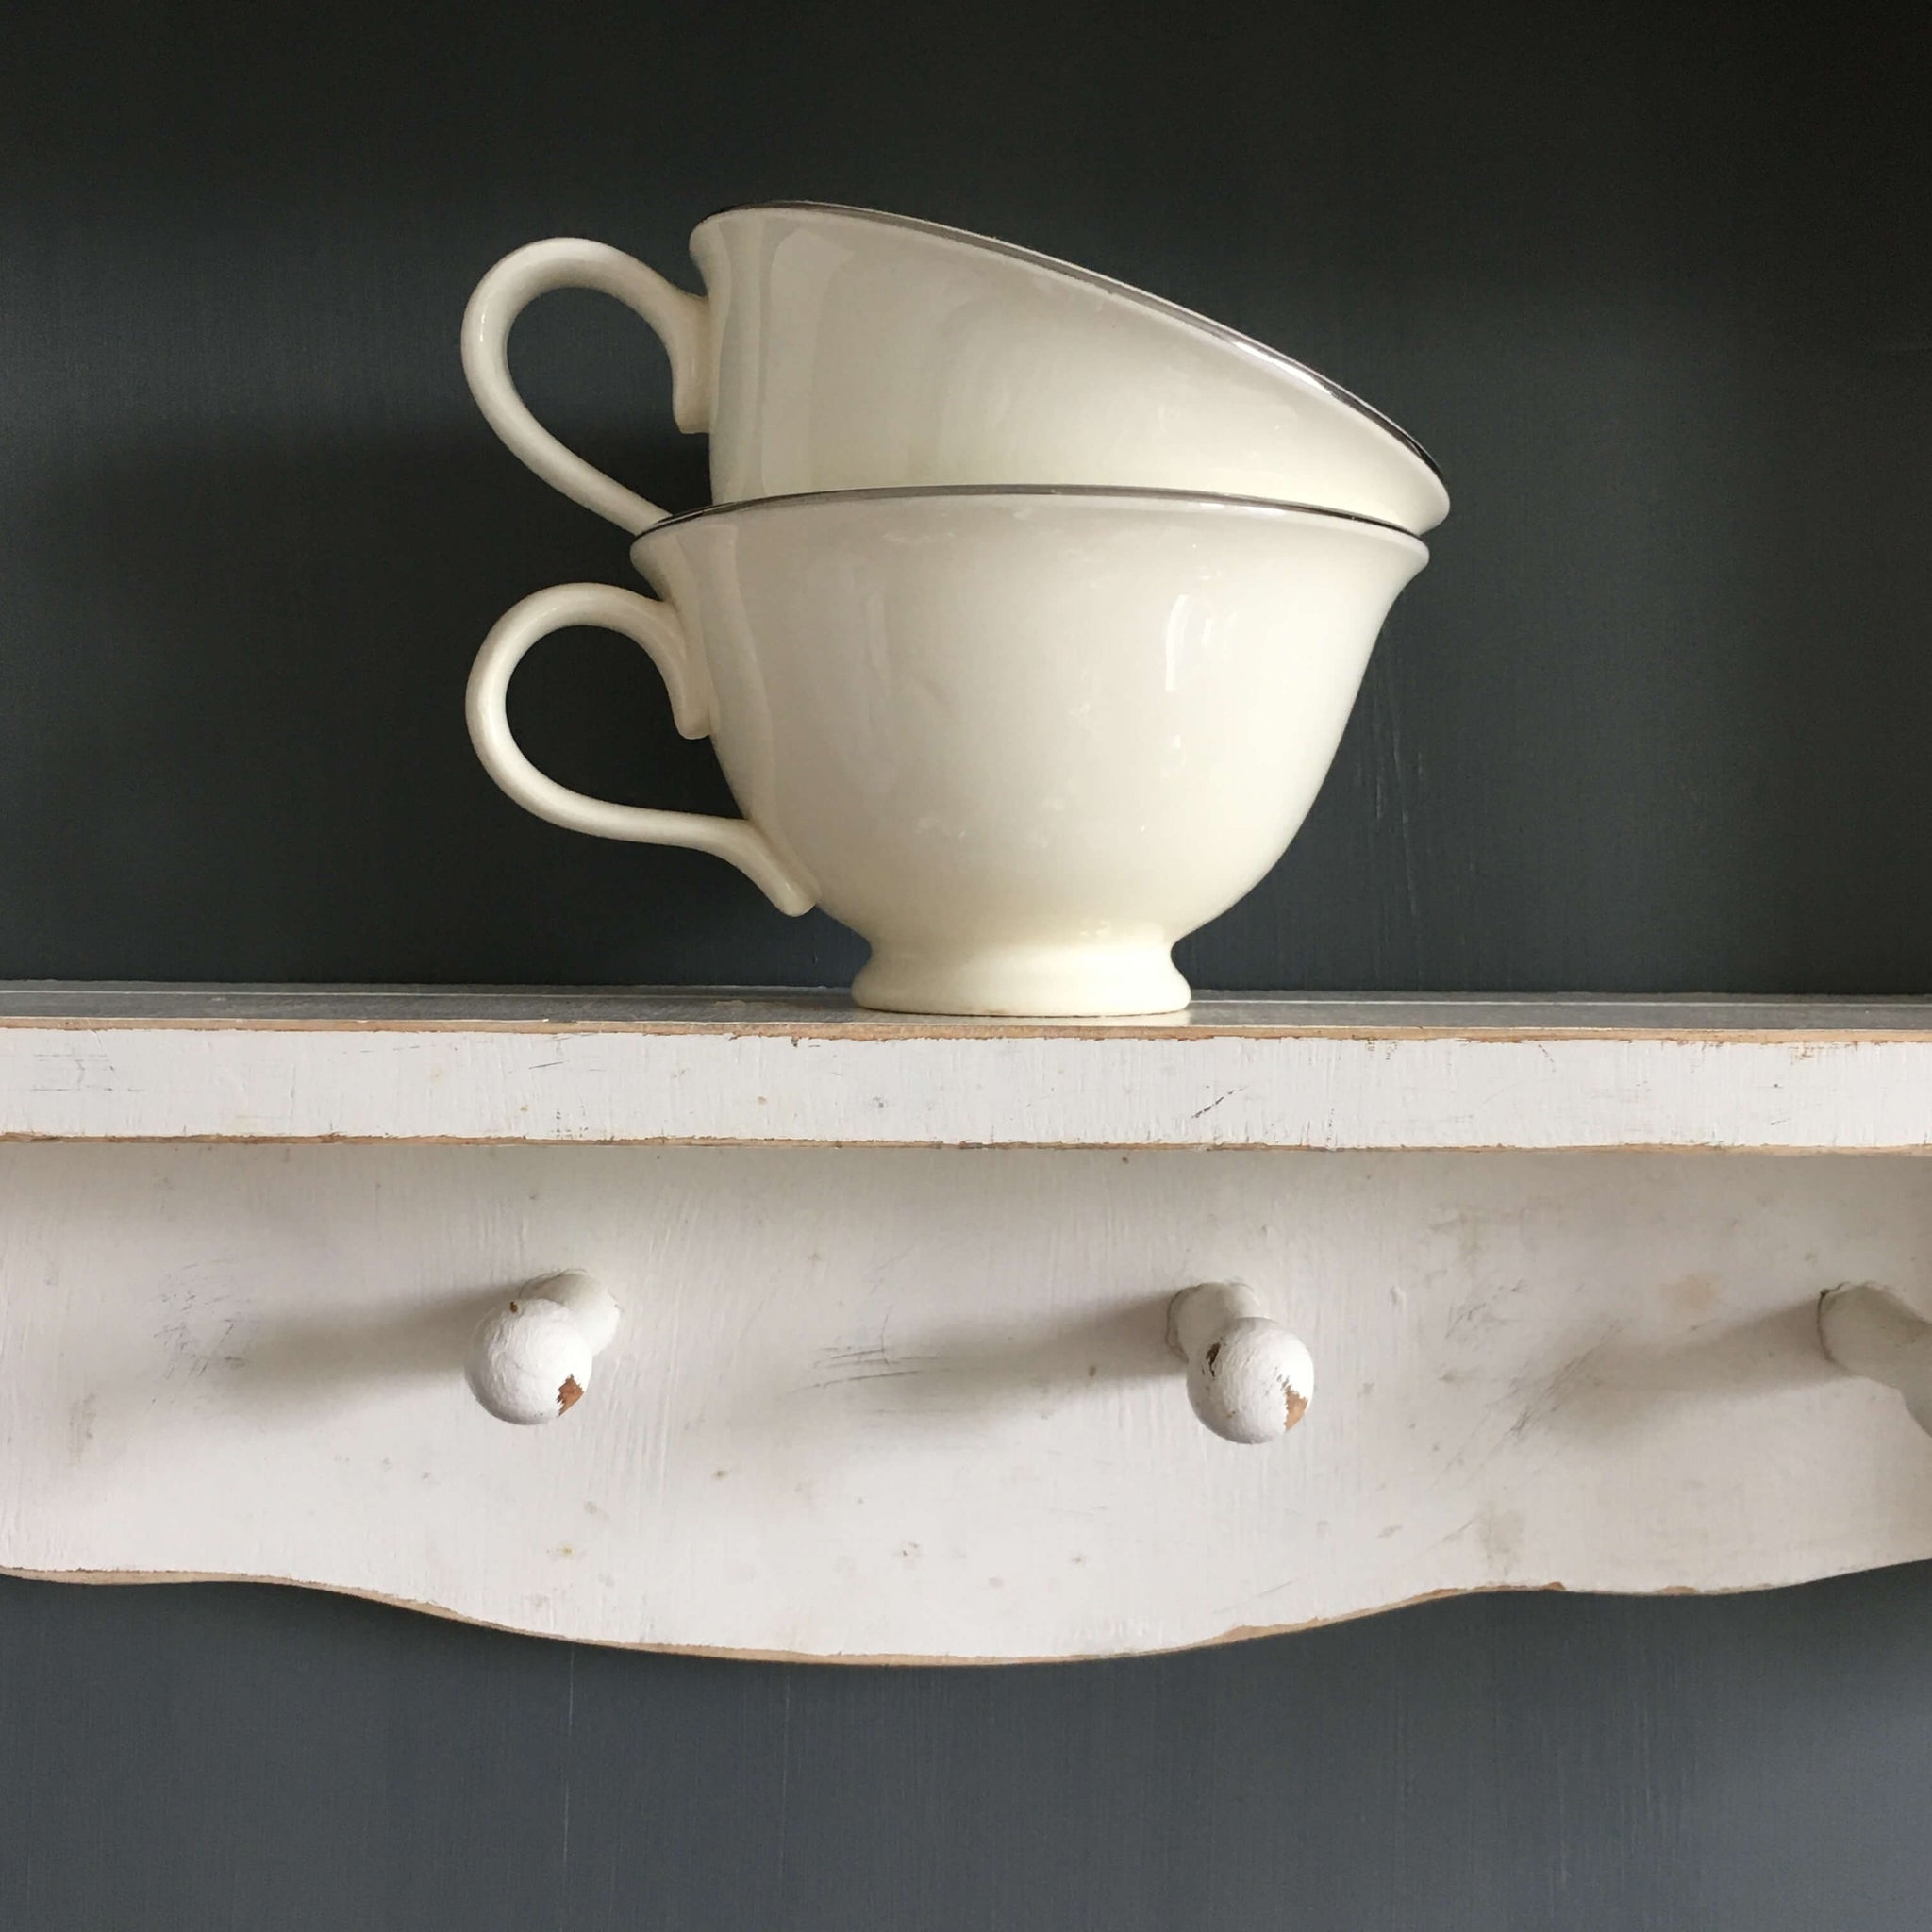 two vintage white teacups on a wooden shelf